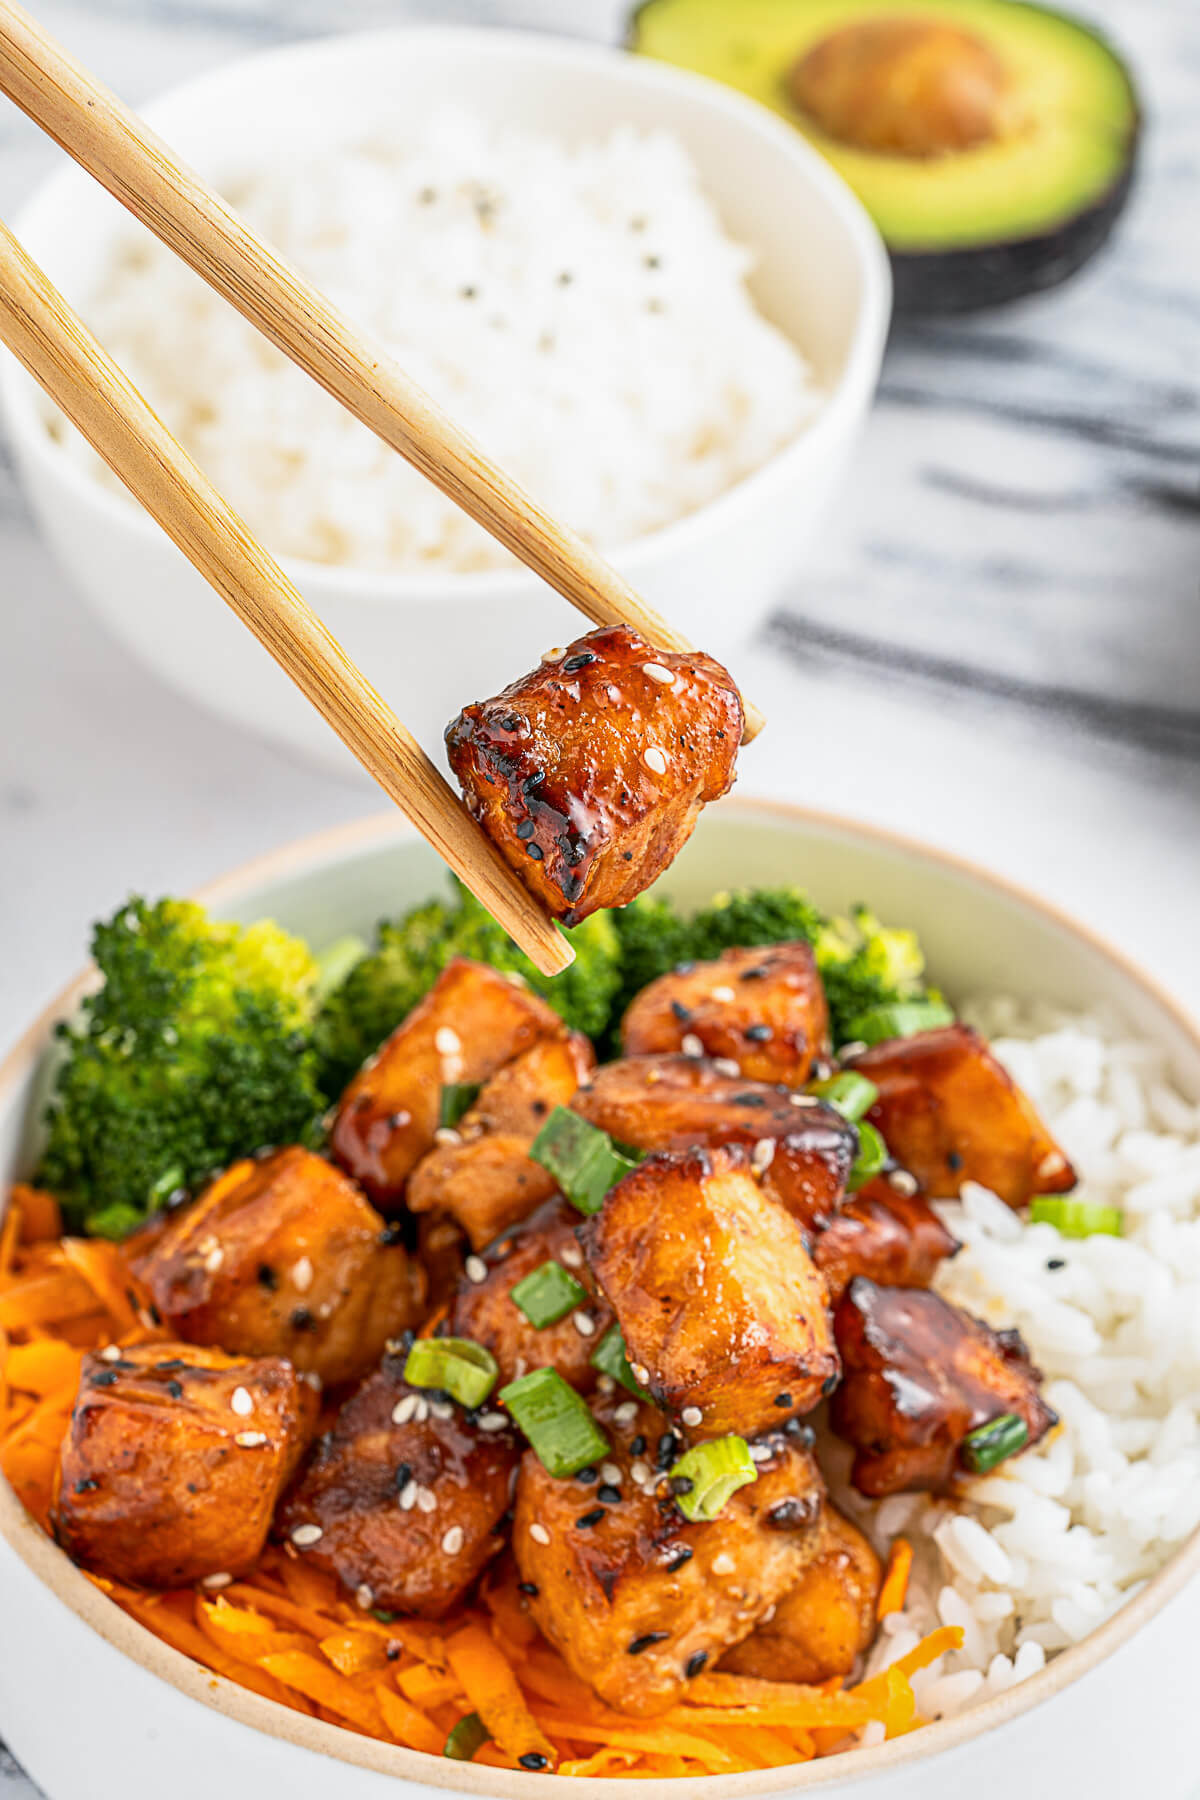 A pair of wooden chopsticks hold a piece of teriyaki salmon over a bowl of teriyaki salmon, vegetables, and rice.